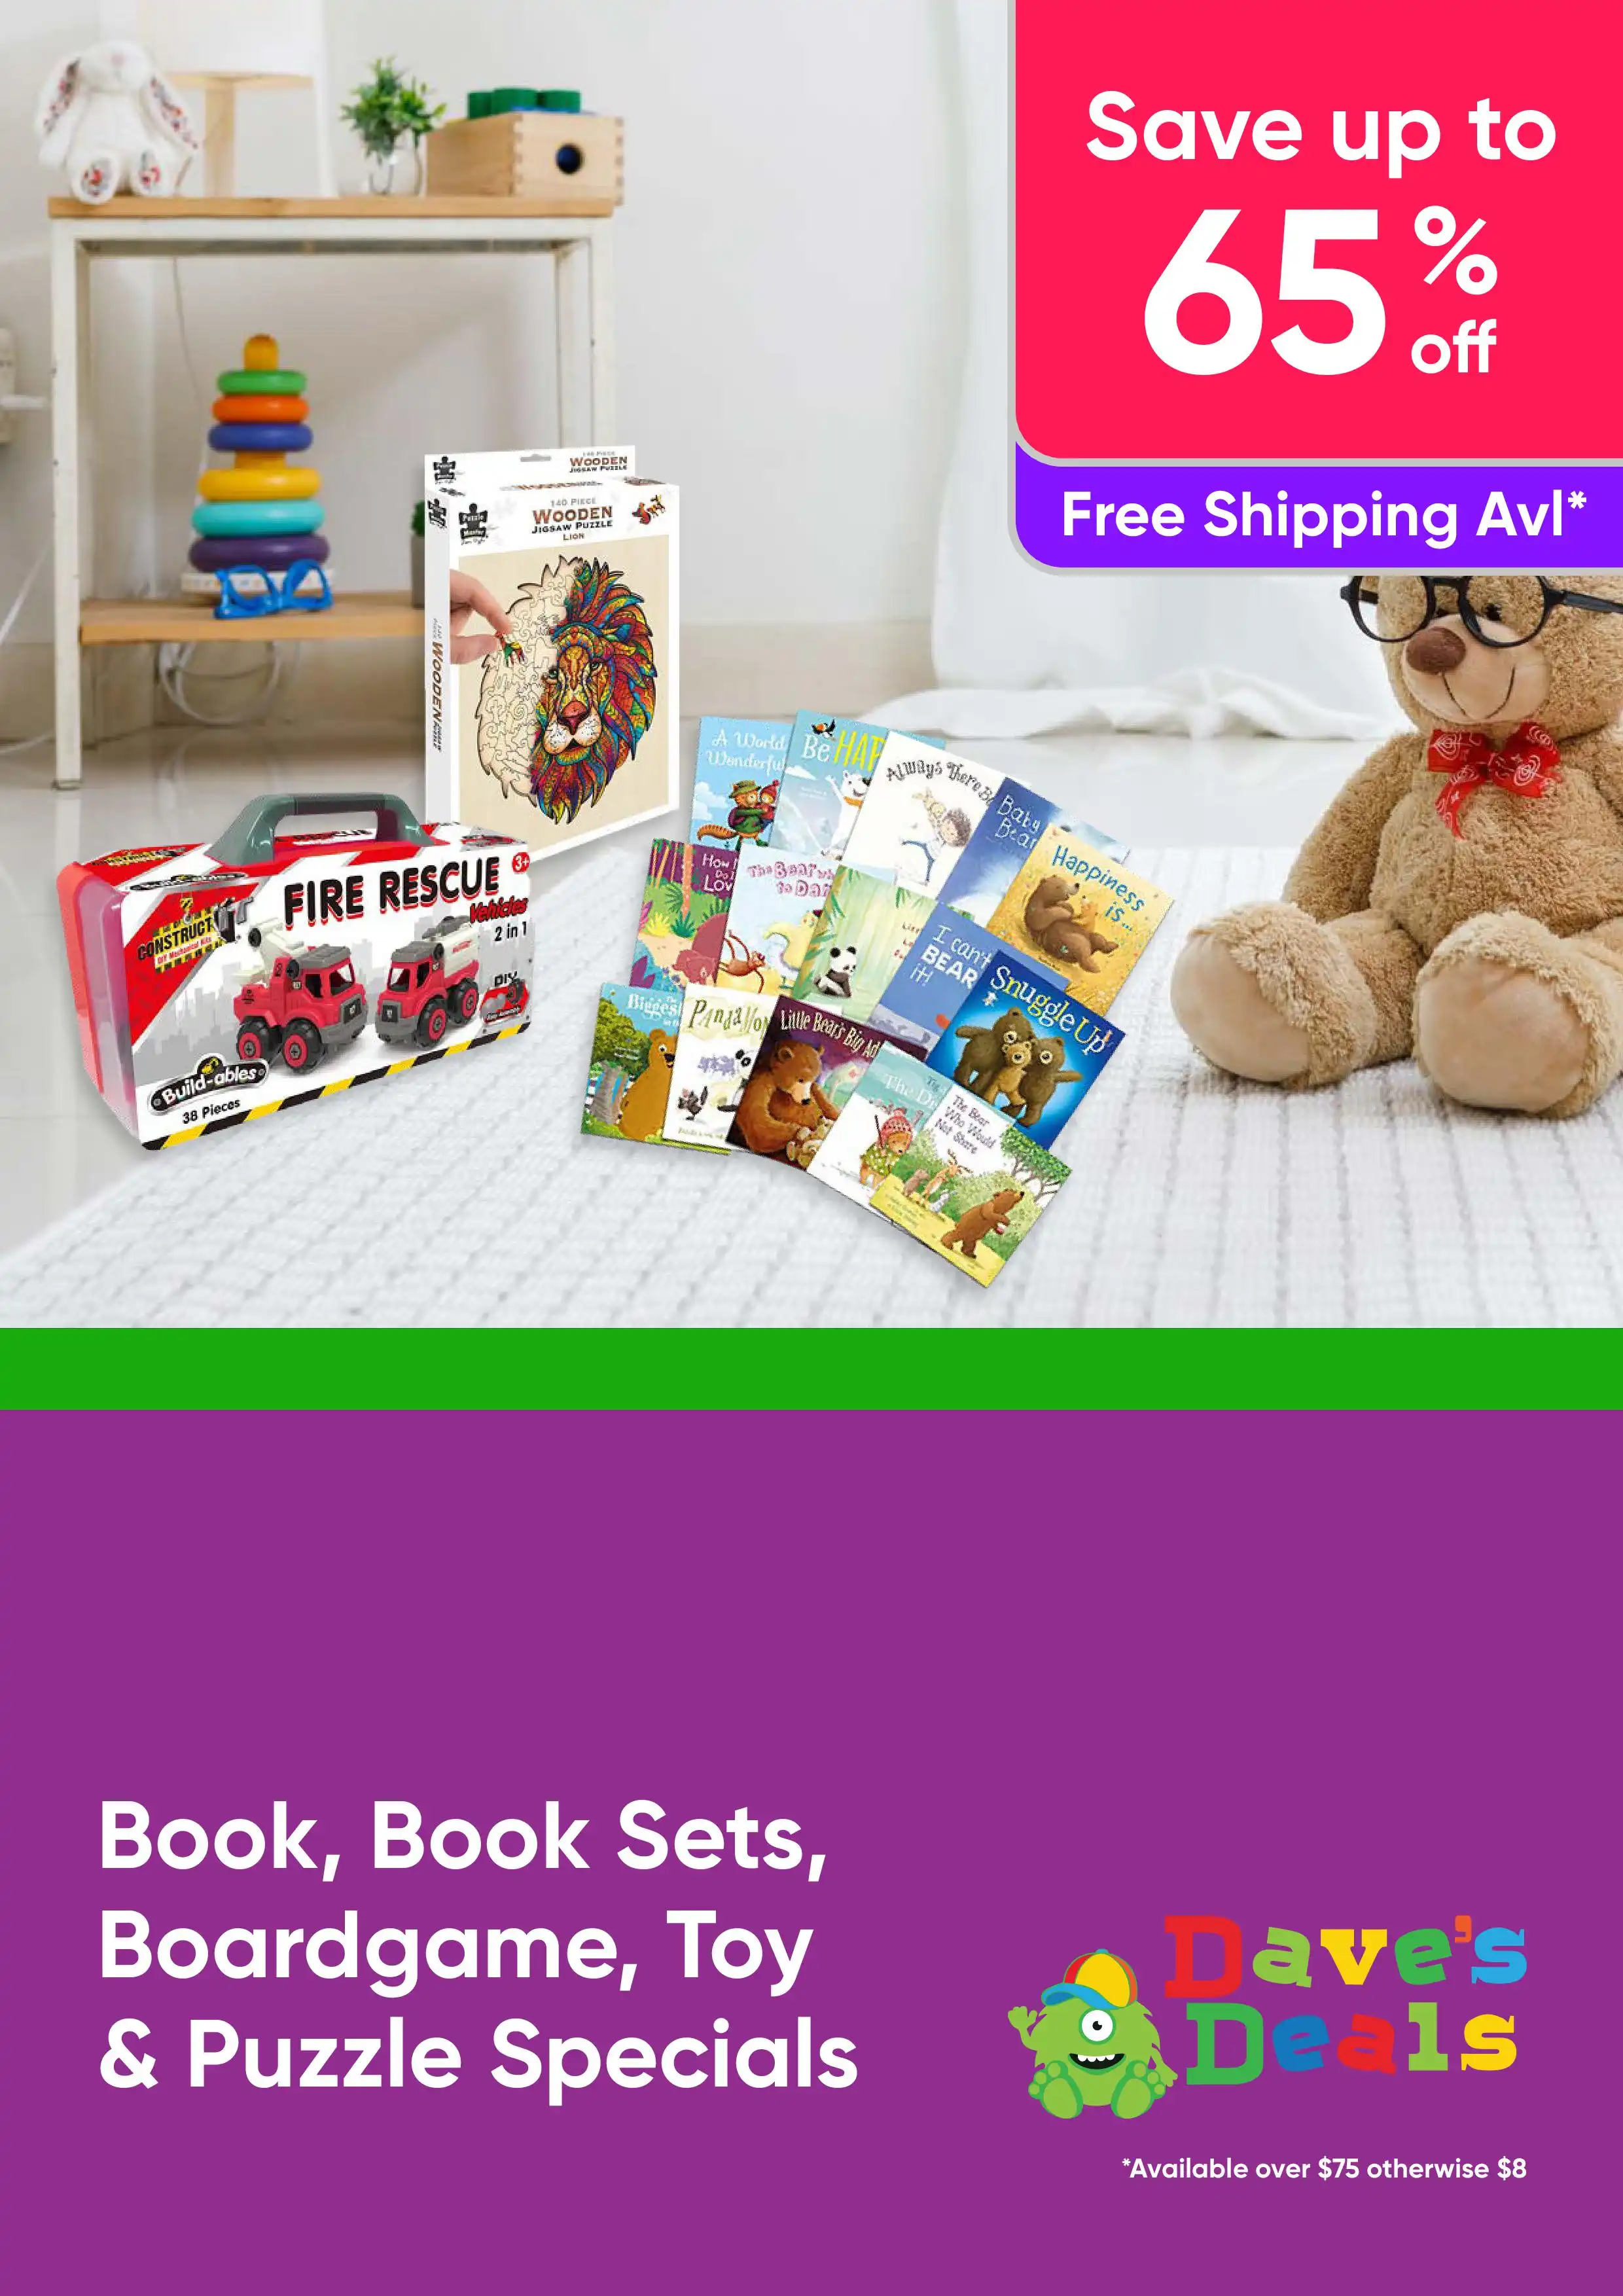 Save Up to 65% off a Range of Books, Book Sets, Board games, Toys and Puzzles